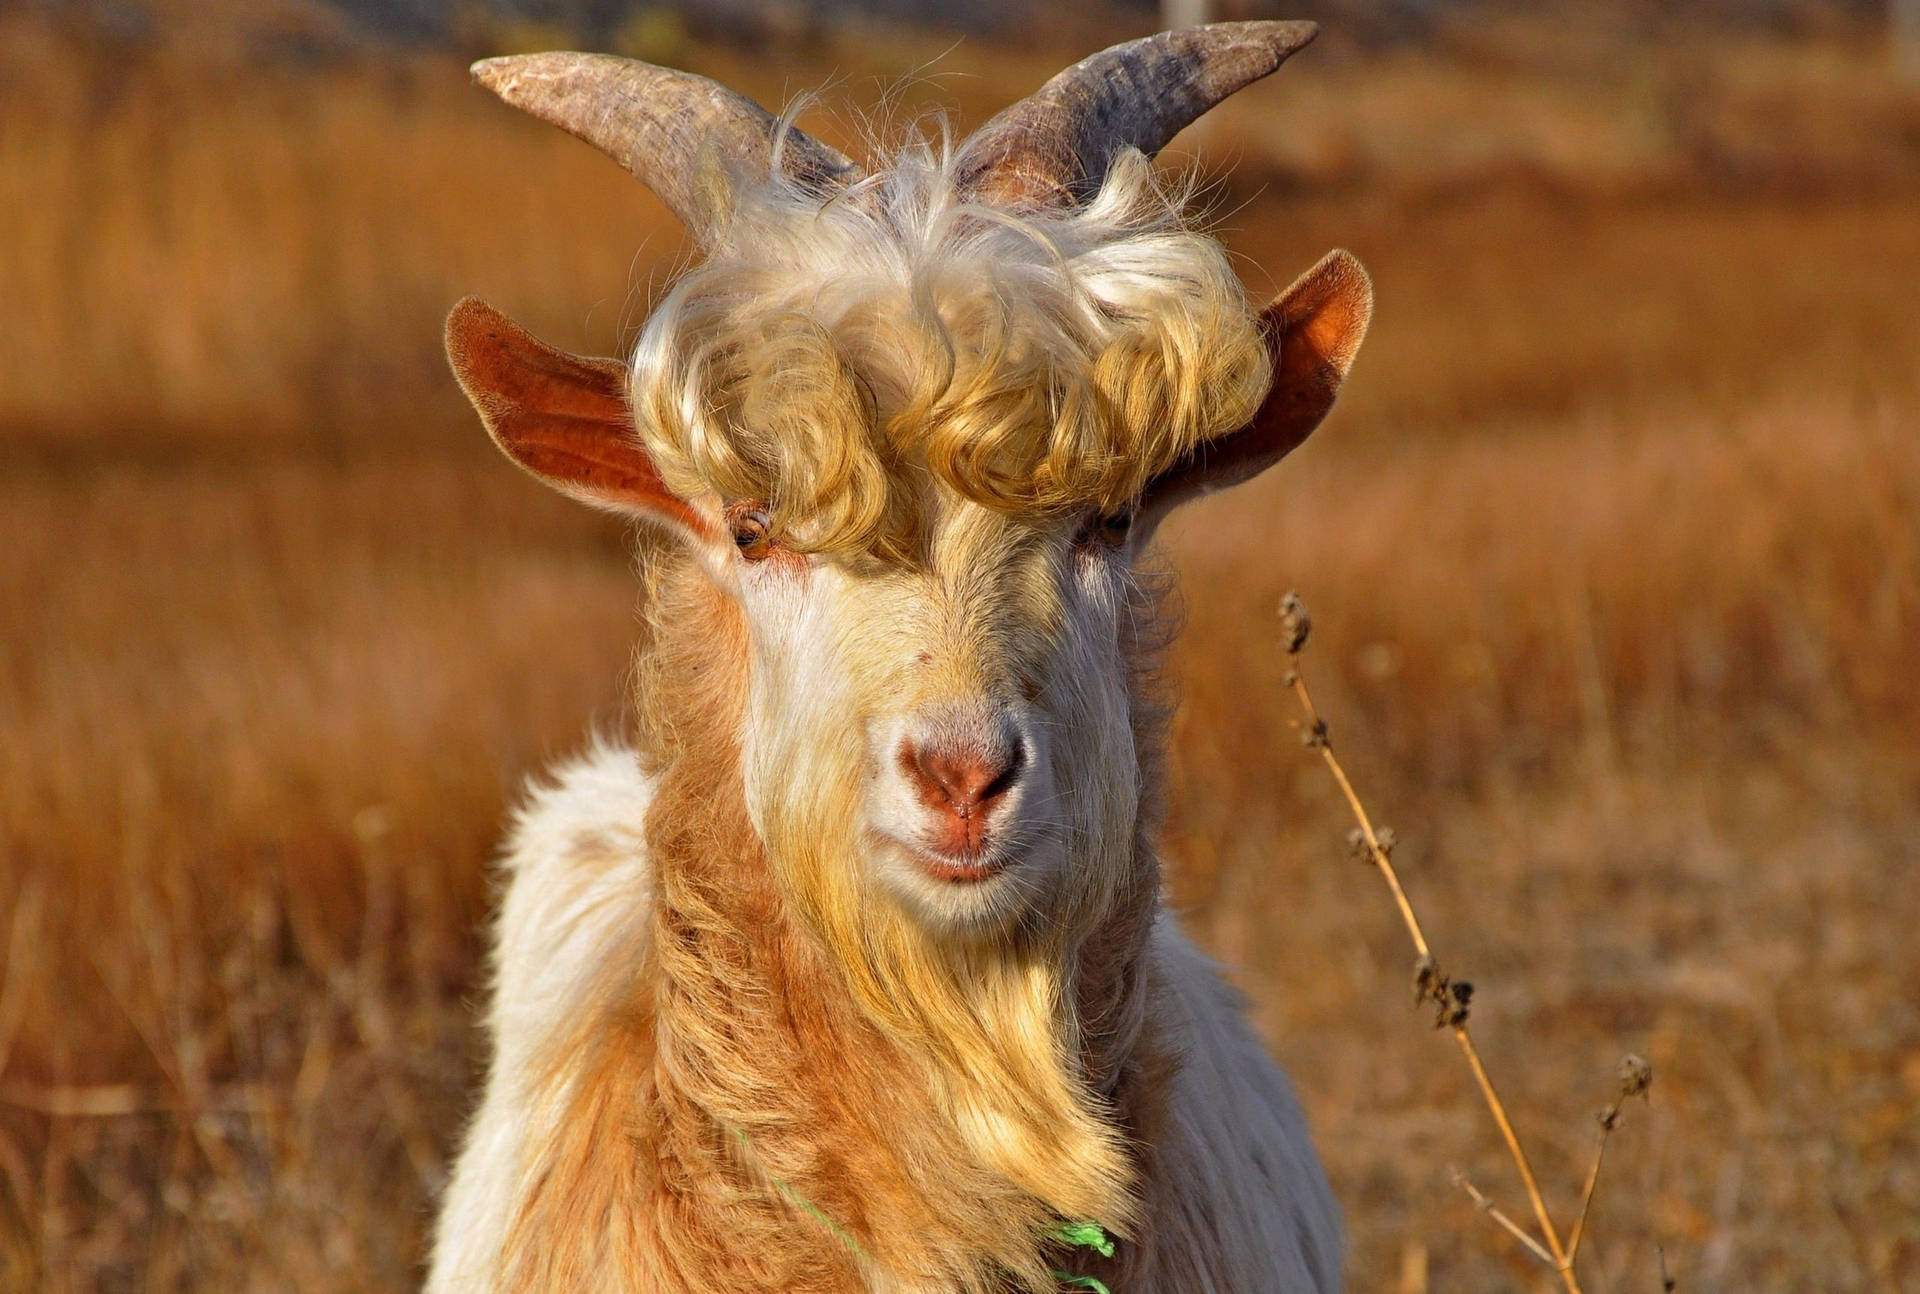 A Majestic Goat With Curly Hair